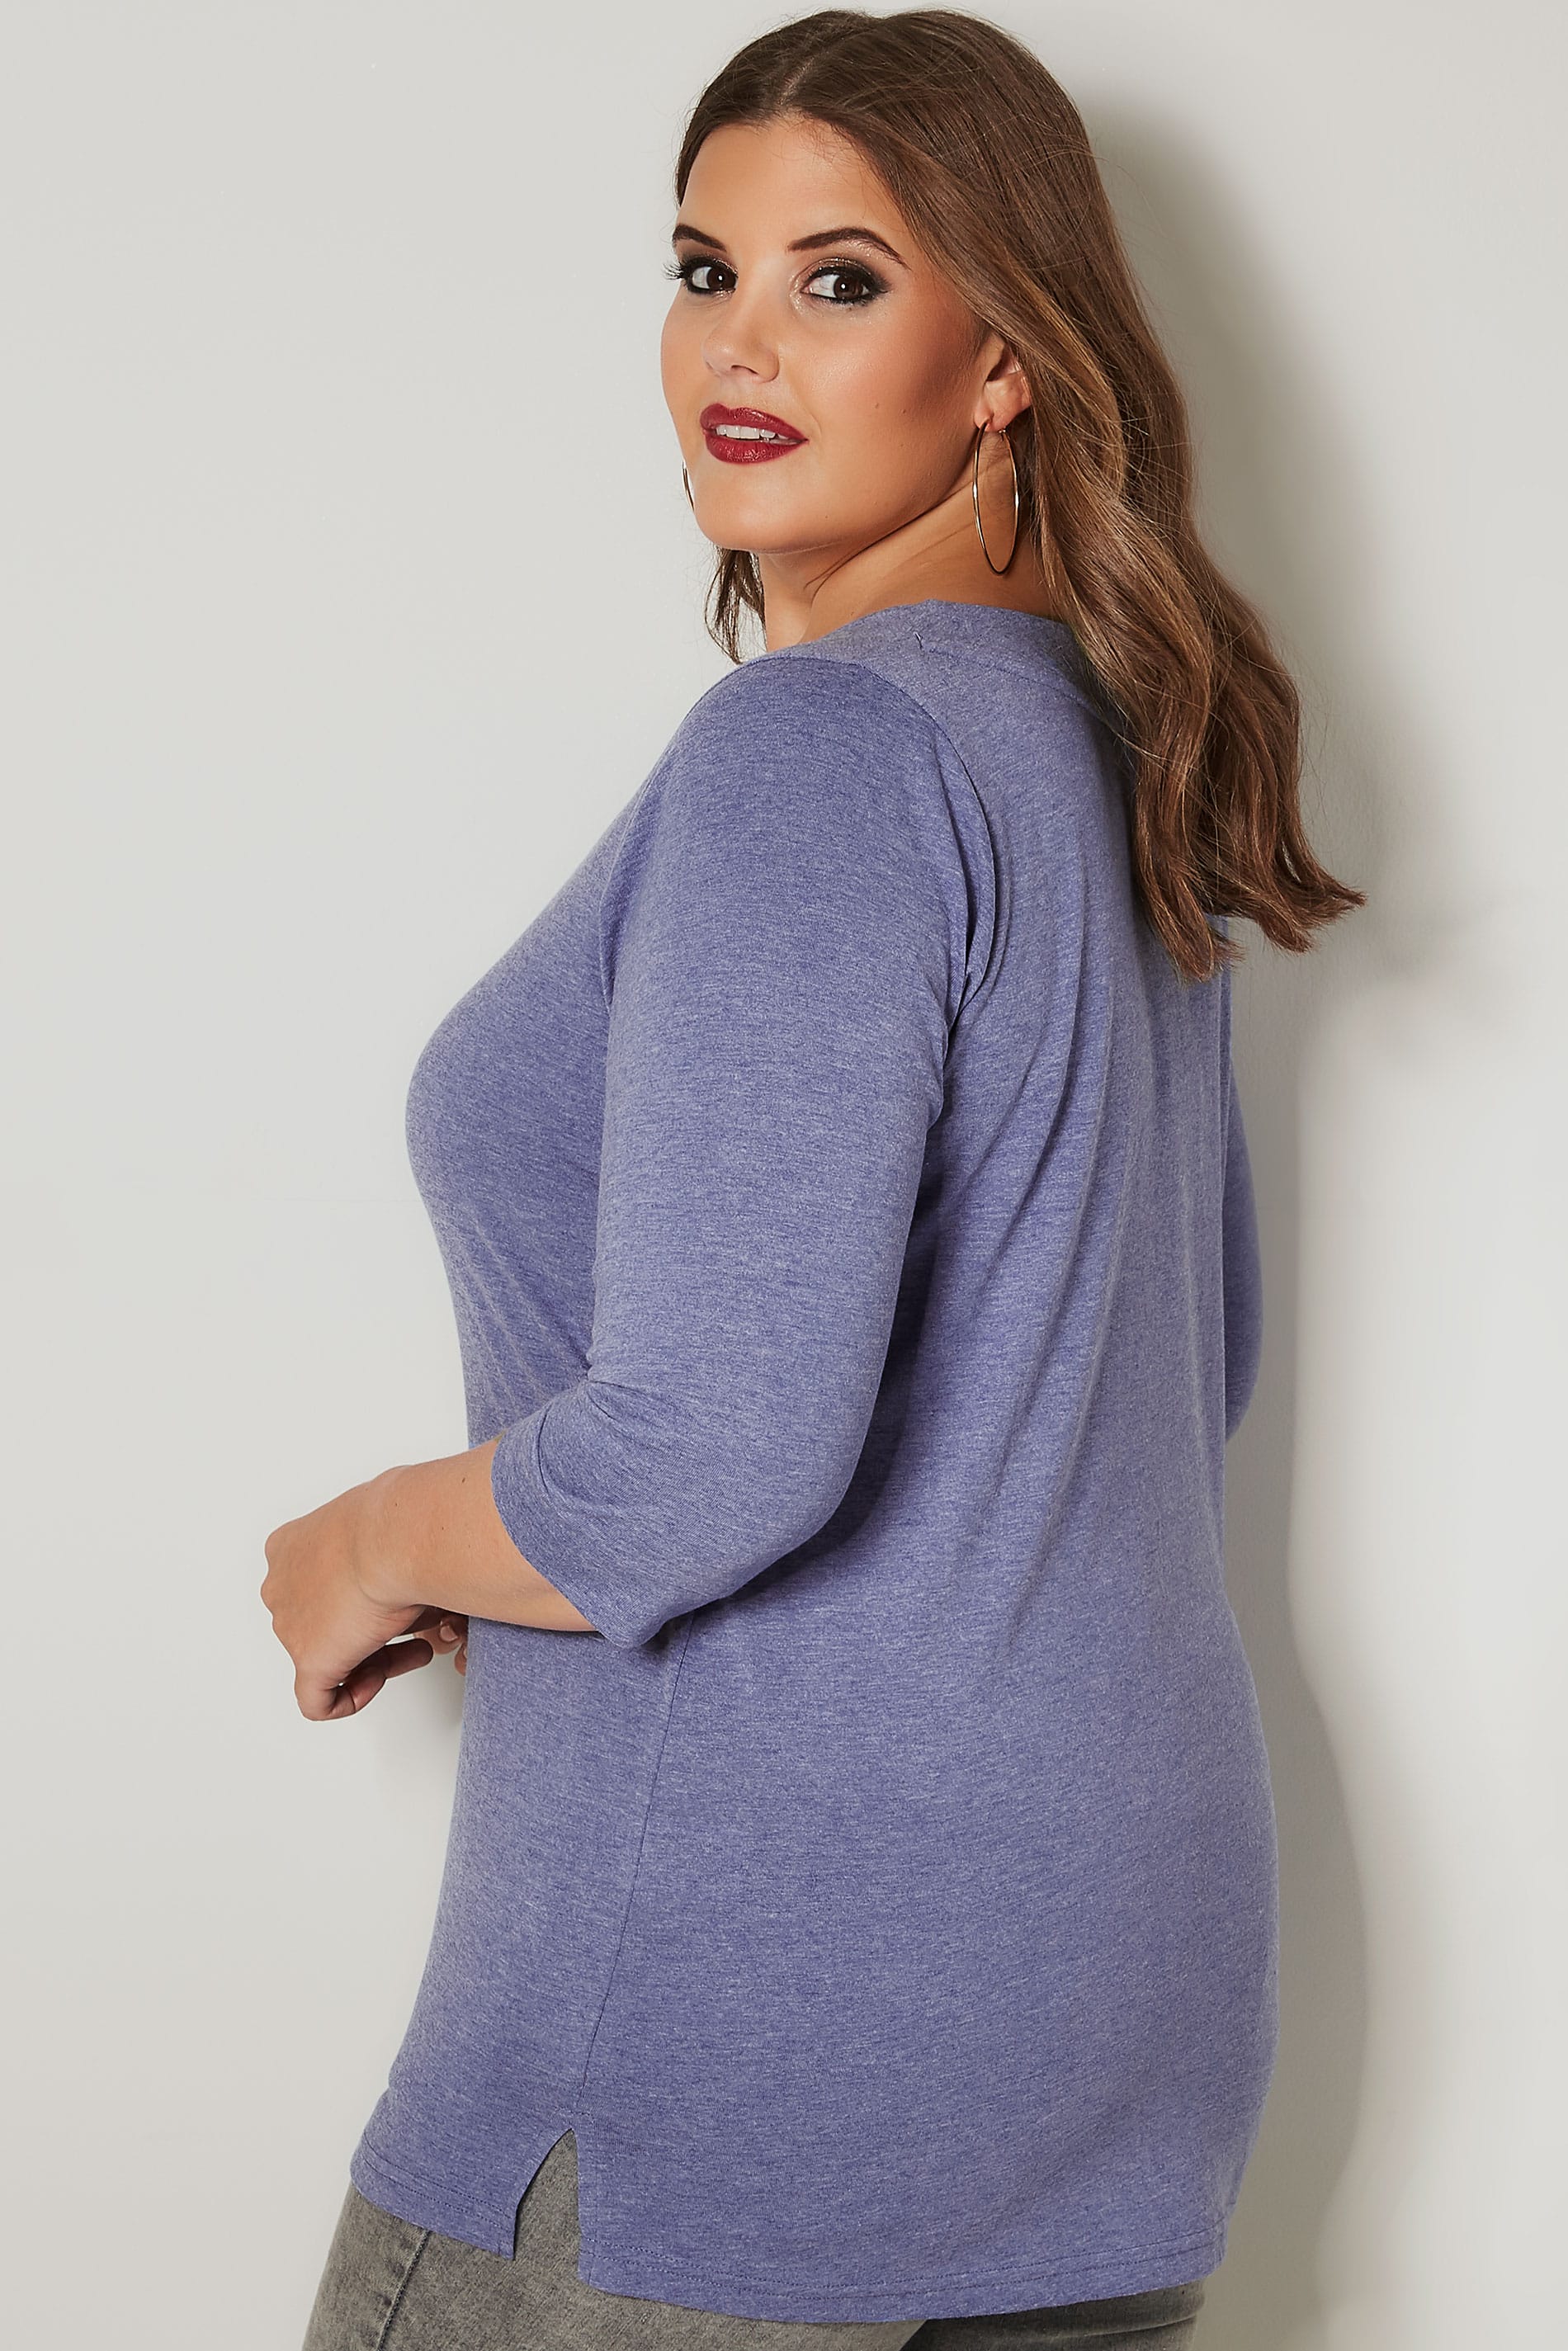 Purple Marl Seamed Scoop Neck Top, plus size 16 to 36